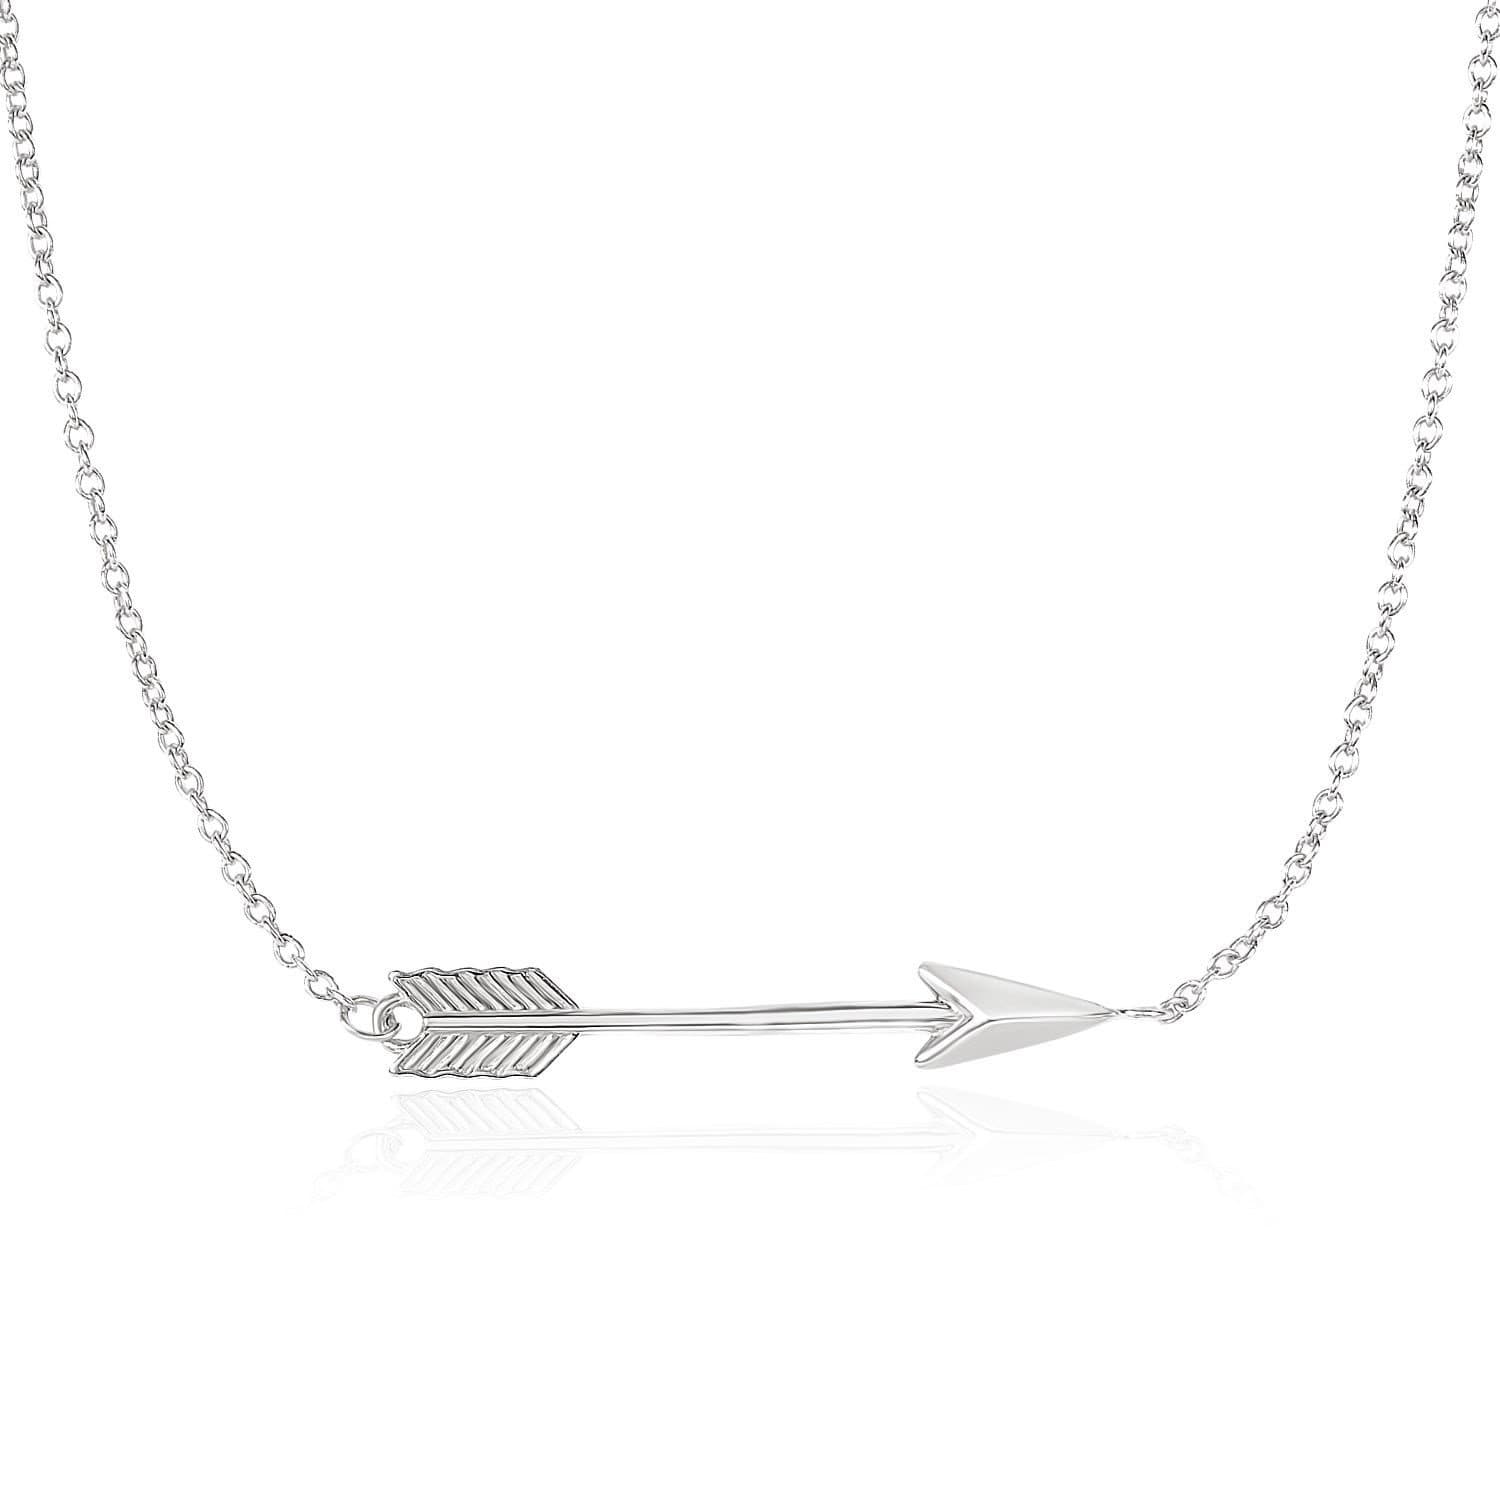 14k White Gold Chain Necklace with Horizontal Arrow Pendant